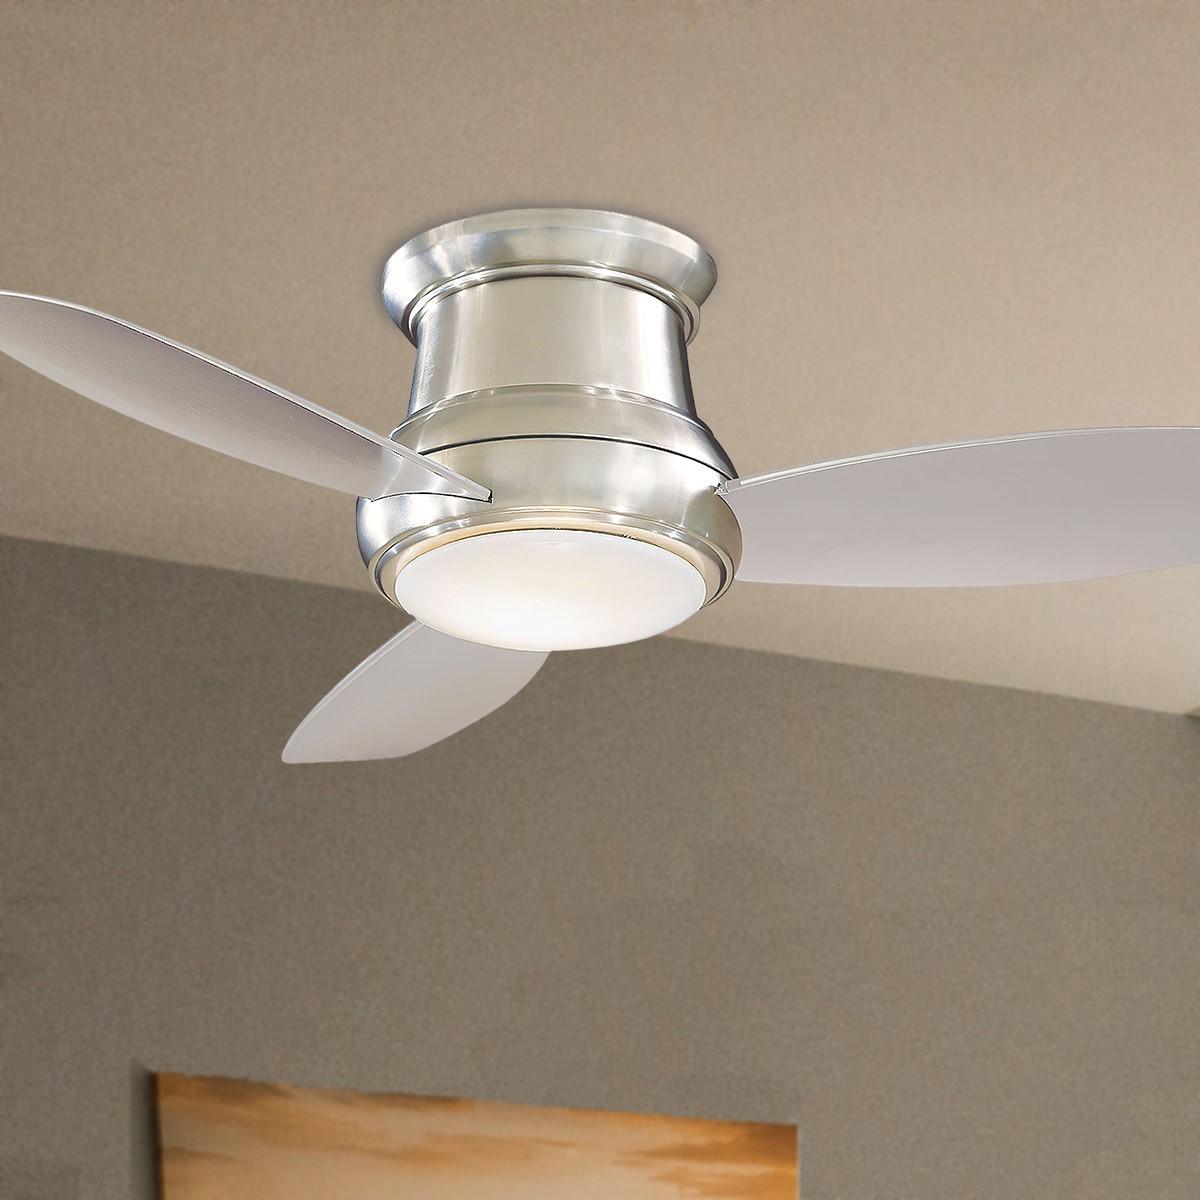 Concept II 44 Inch Modern Ceiling Fan With Light And Remote